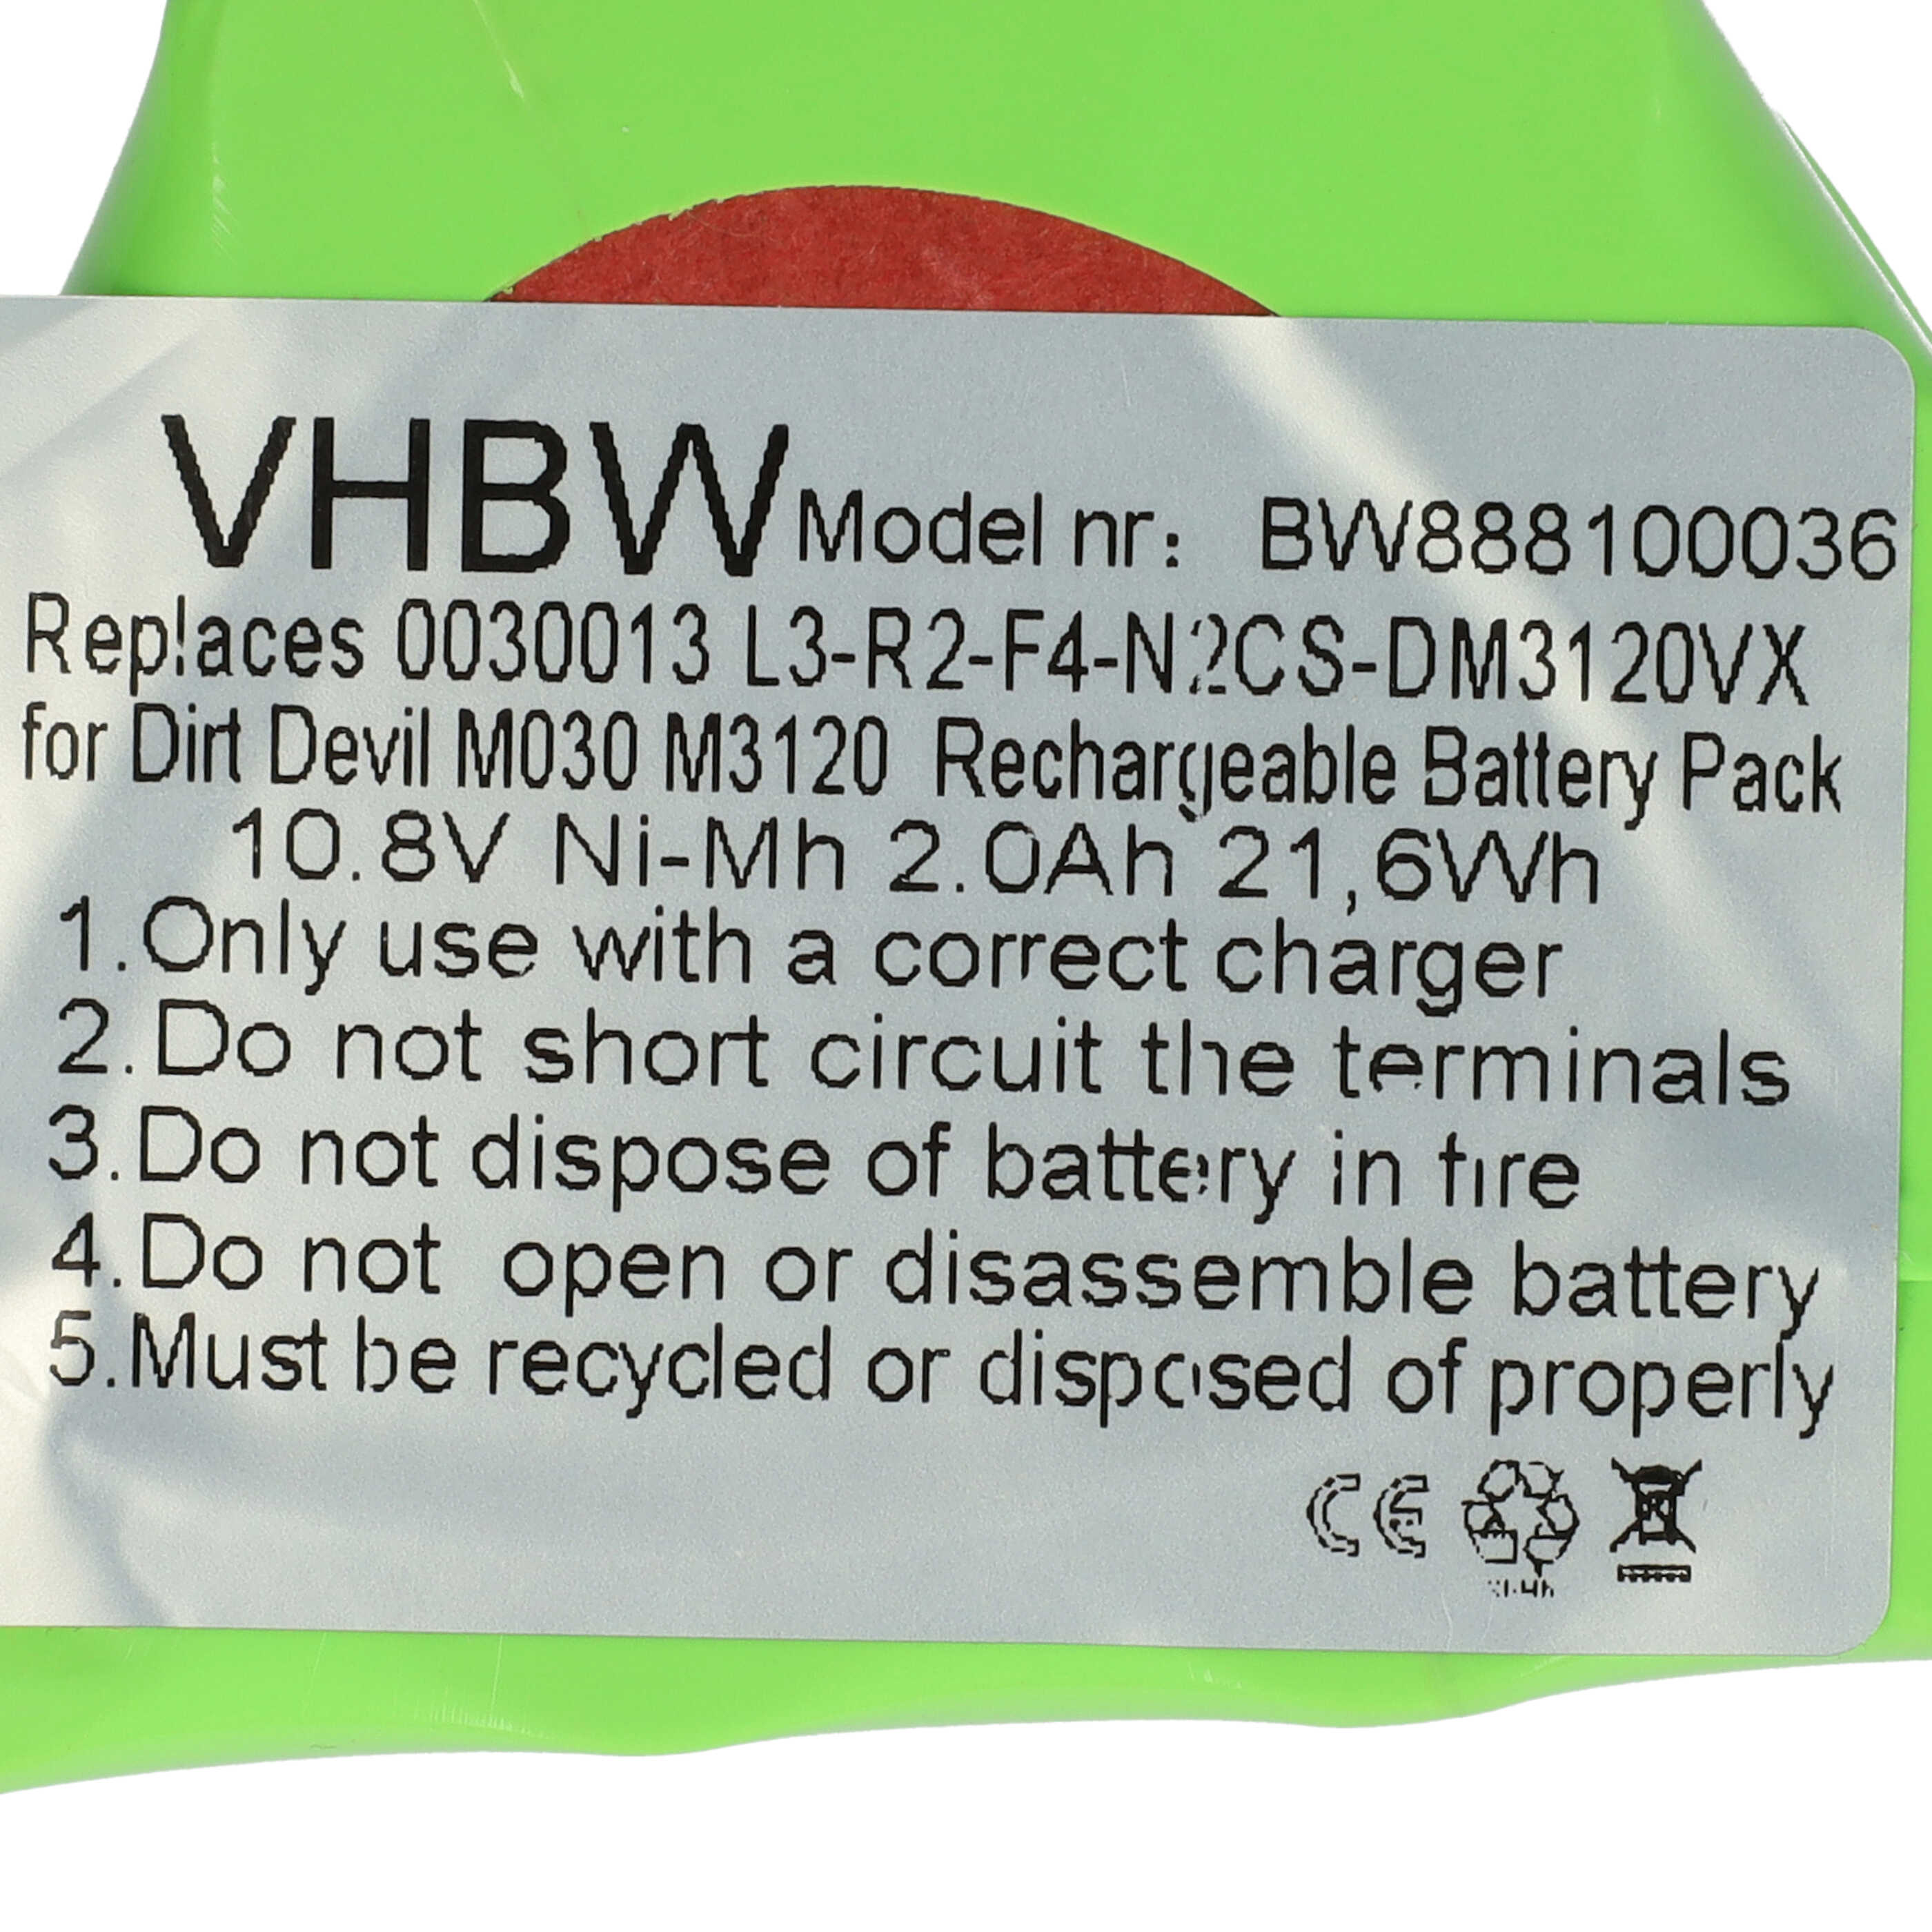 Battery Replacement for Dirt Devil 0030013, L3-R2-F4-N2 for - 2000mAh, 10.8V, NiMH